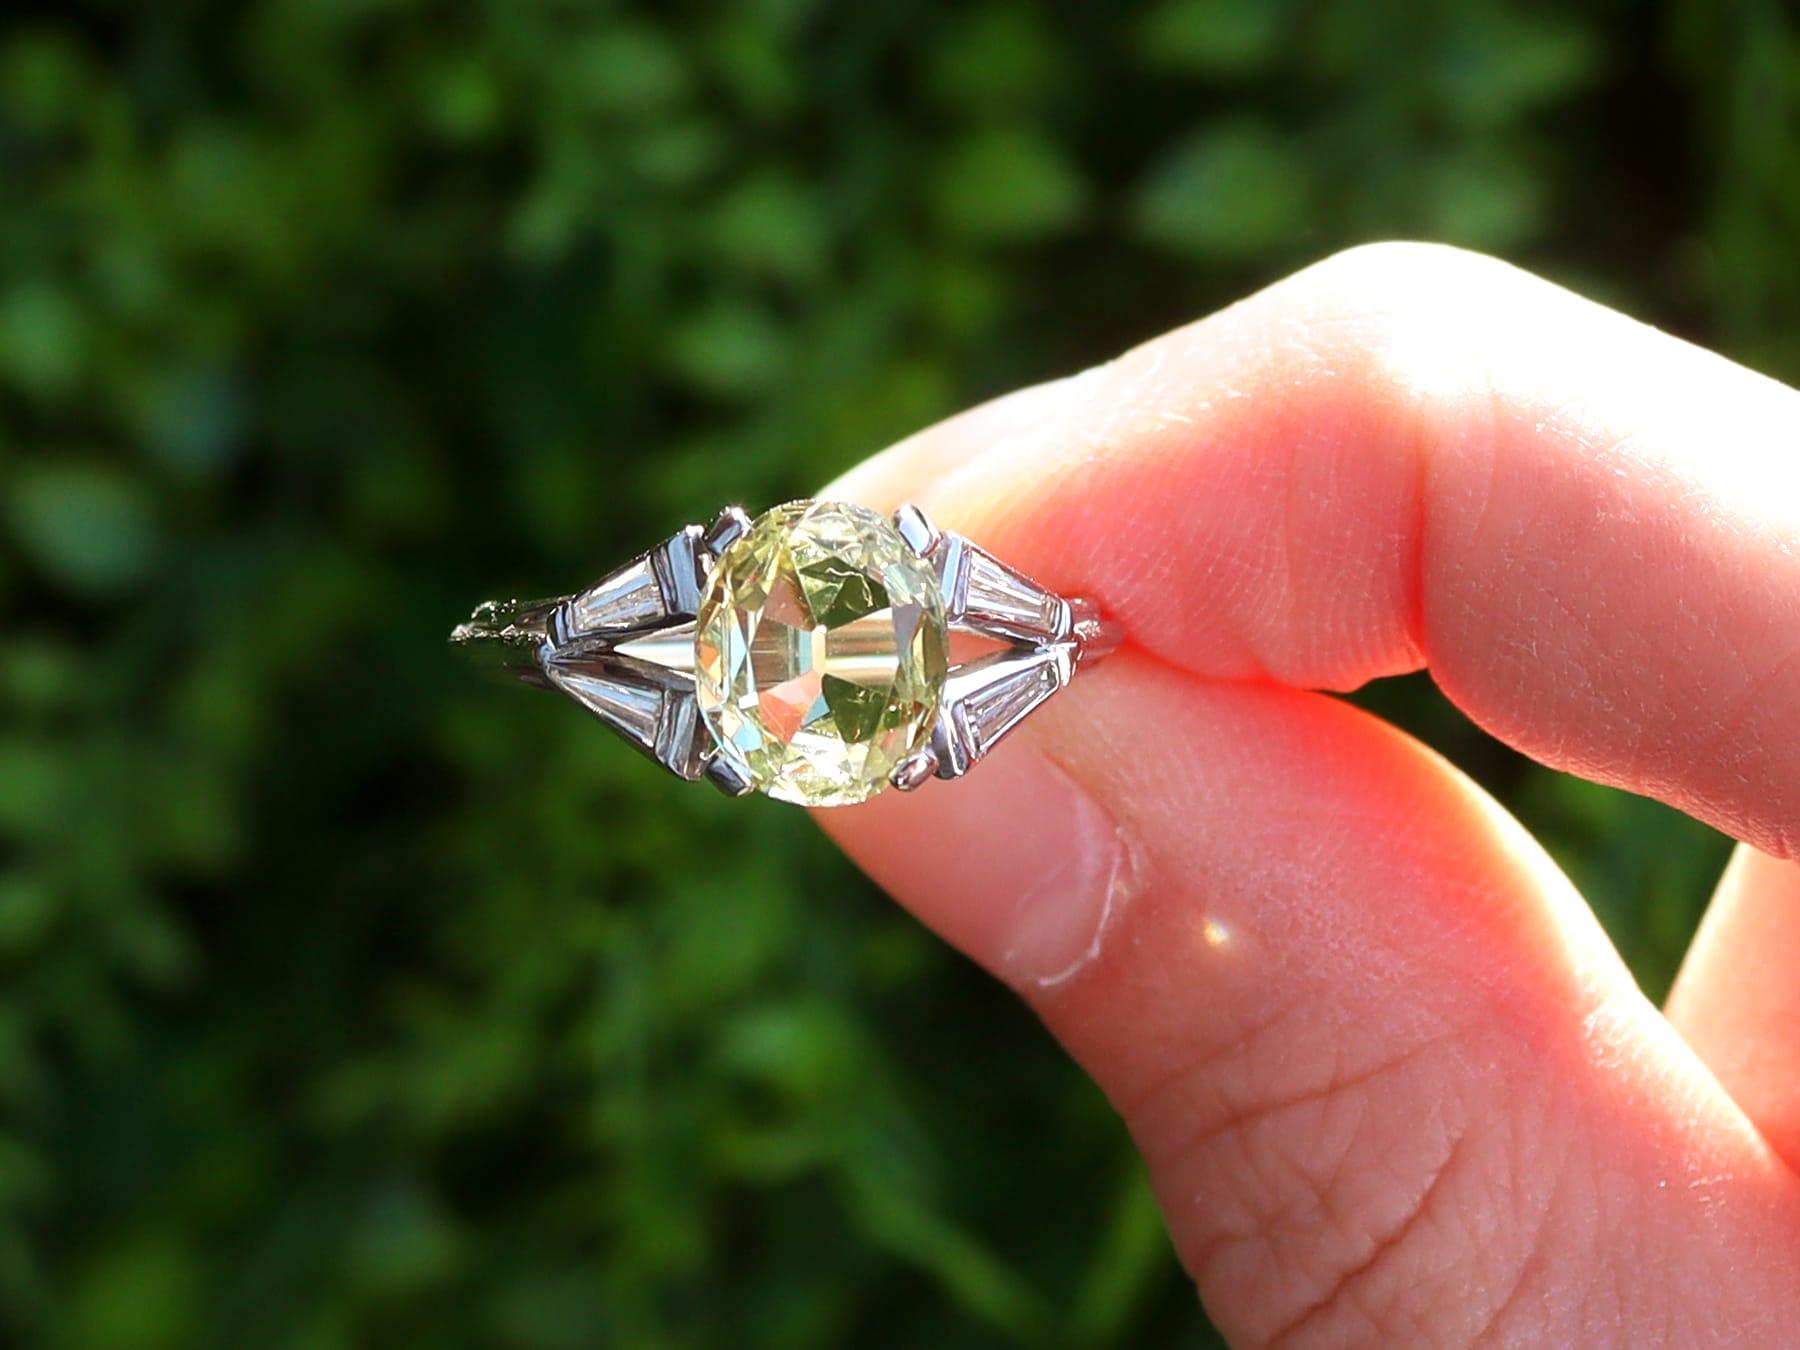 This stunning, fine and impressive vintage 1960s ring has been crafted in 18k white gold.

The impressive pierced decorated setting displays a central feature four-claw set 2.16ct oval faceted cut chrysoberyl.

The bifurcating ring shoulders